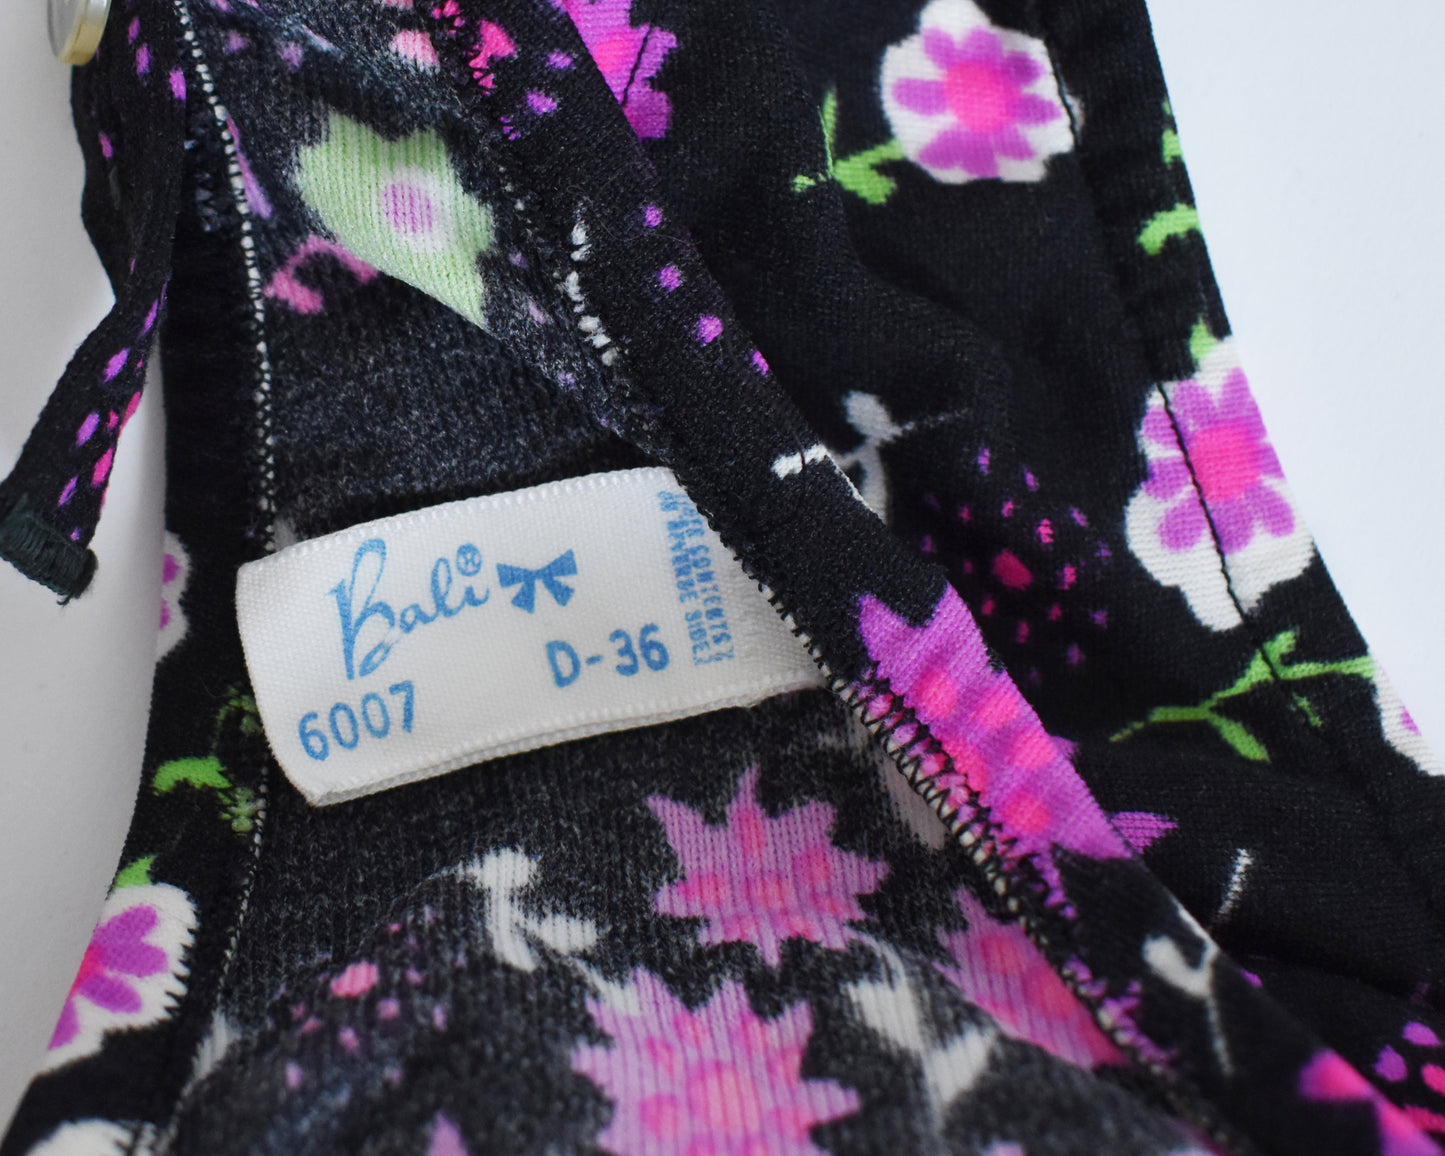 close up of the tag which says Bali